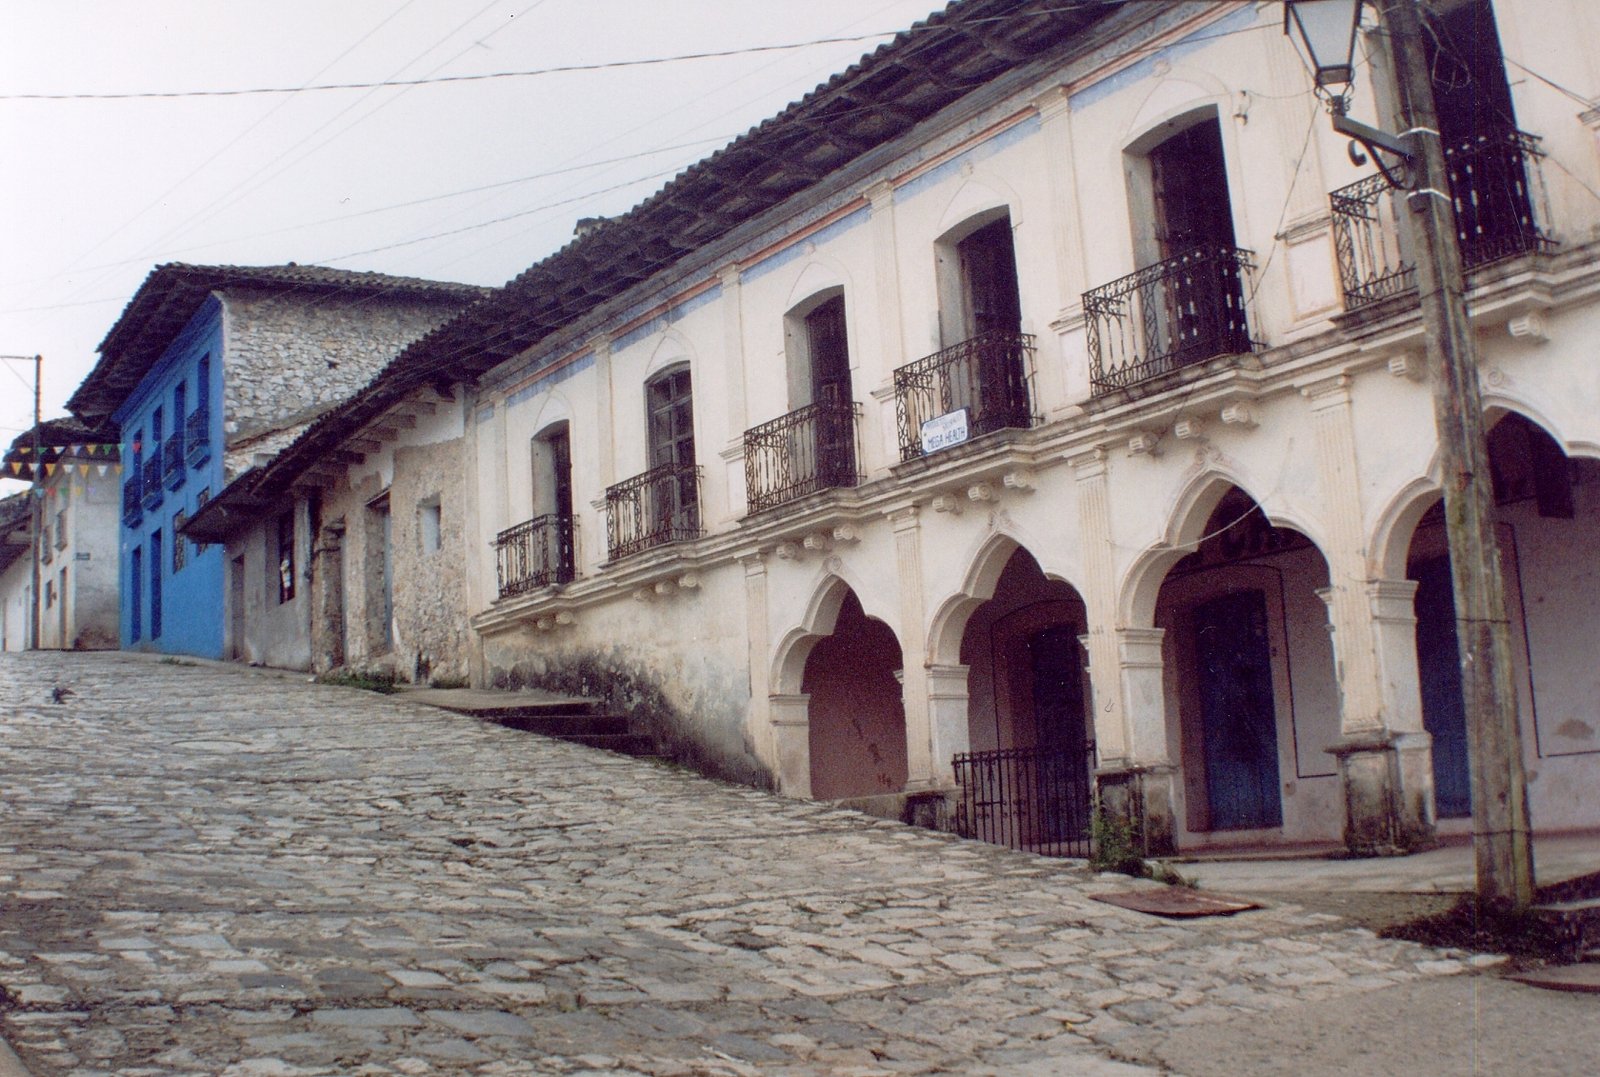 a row of old buildings on a cobblestone street